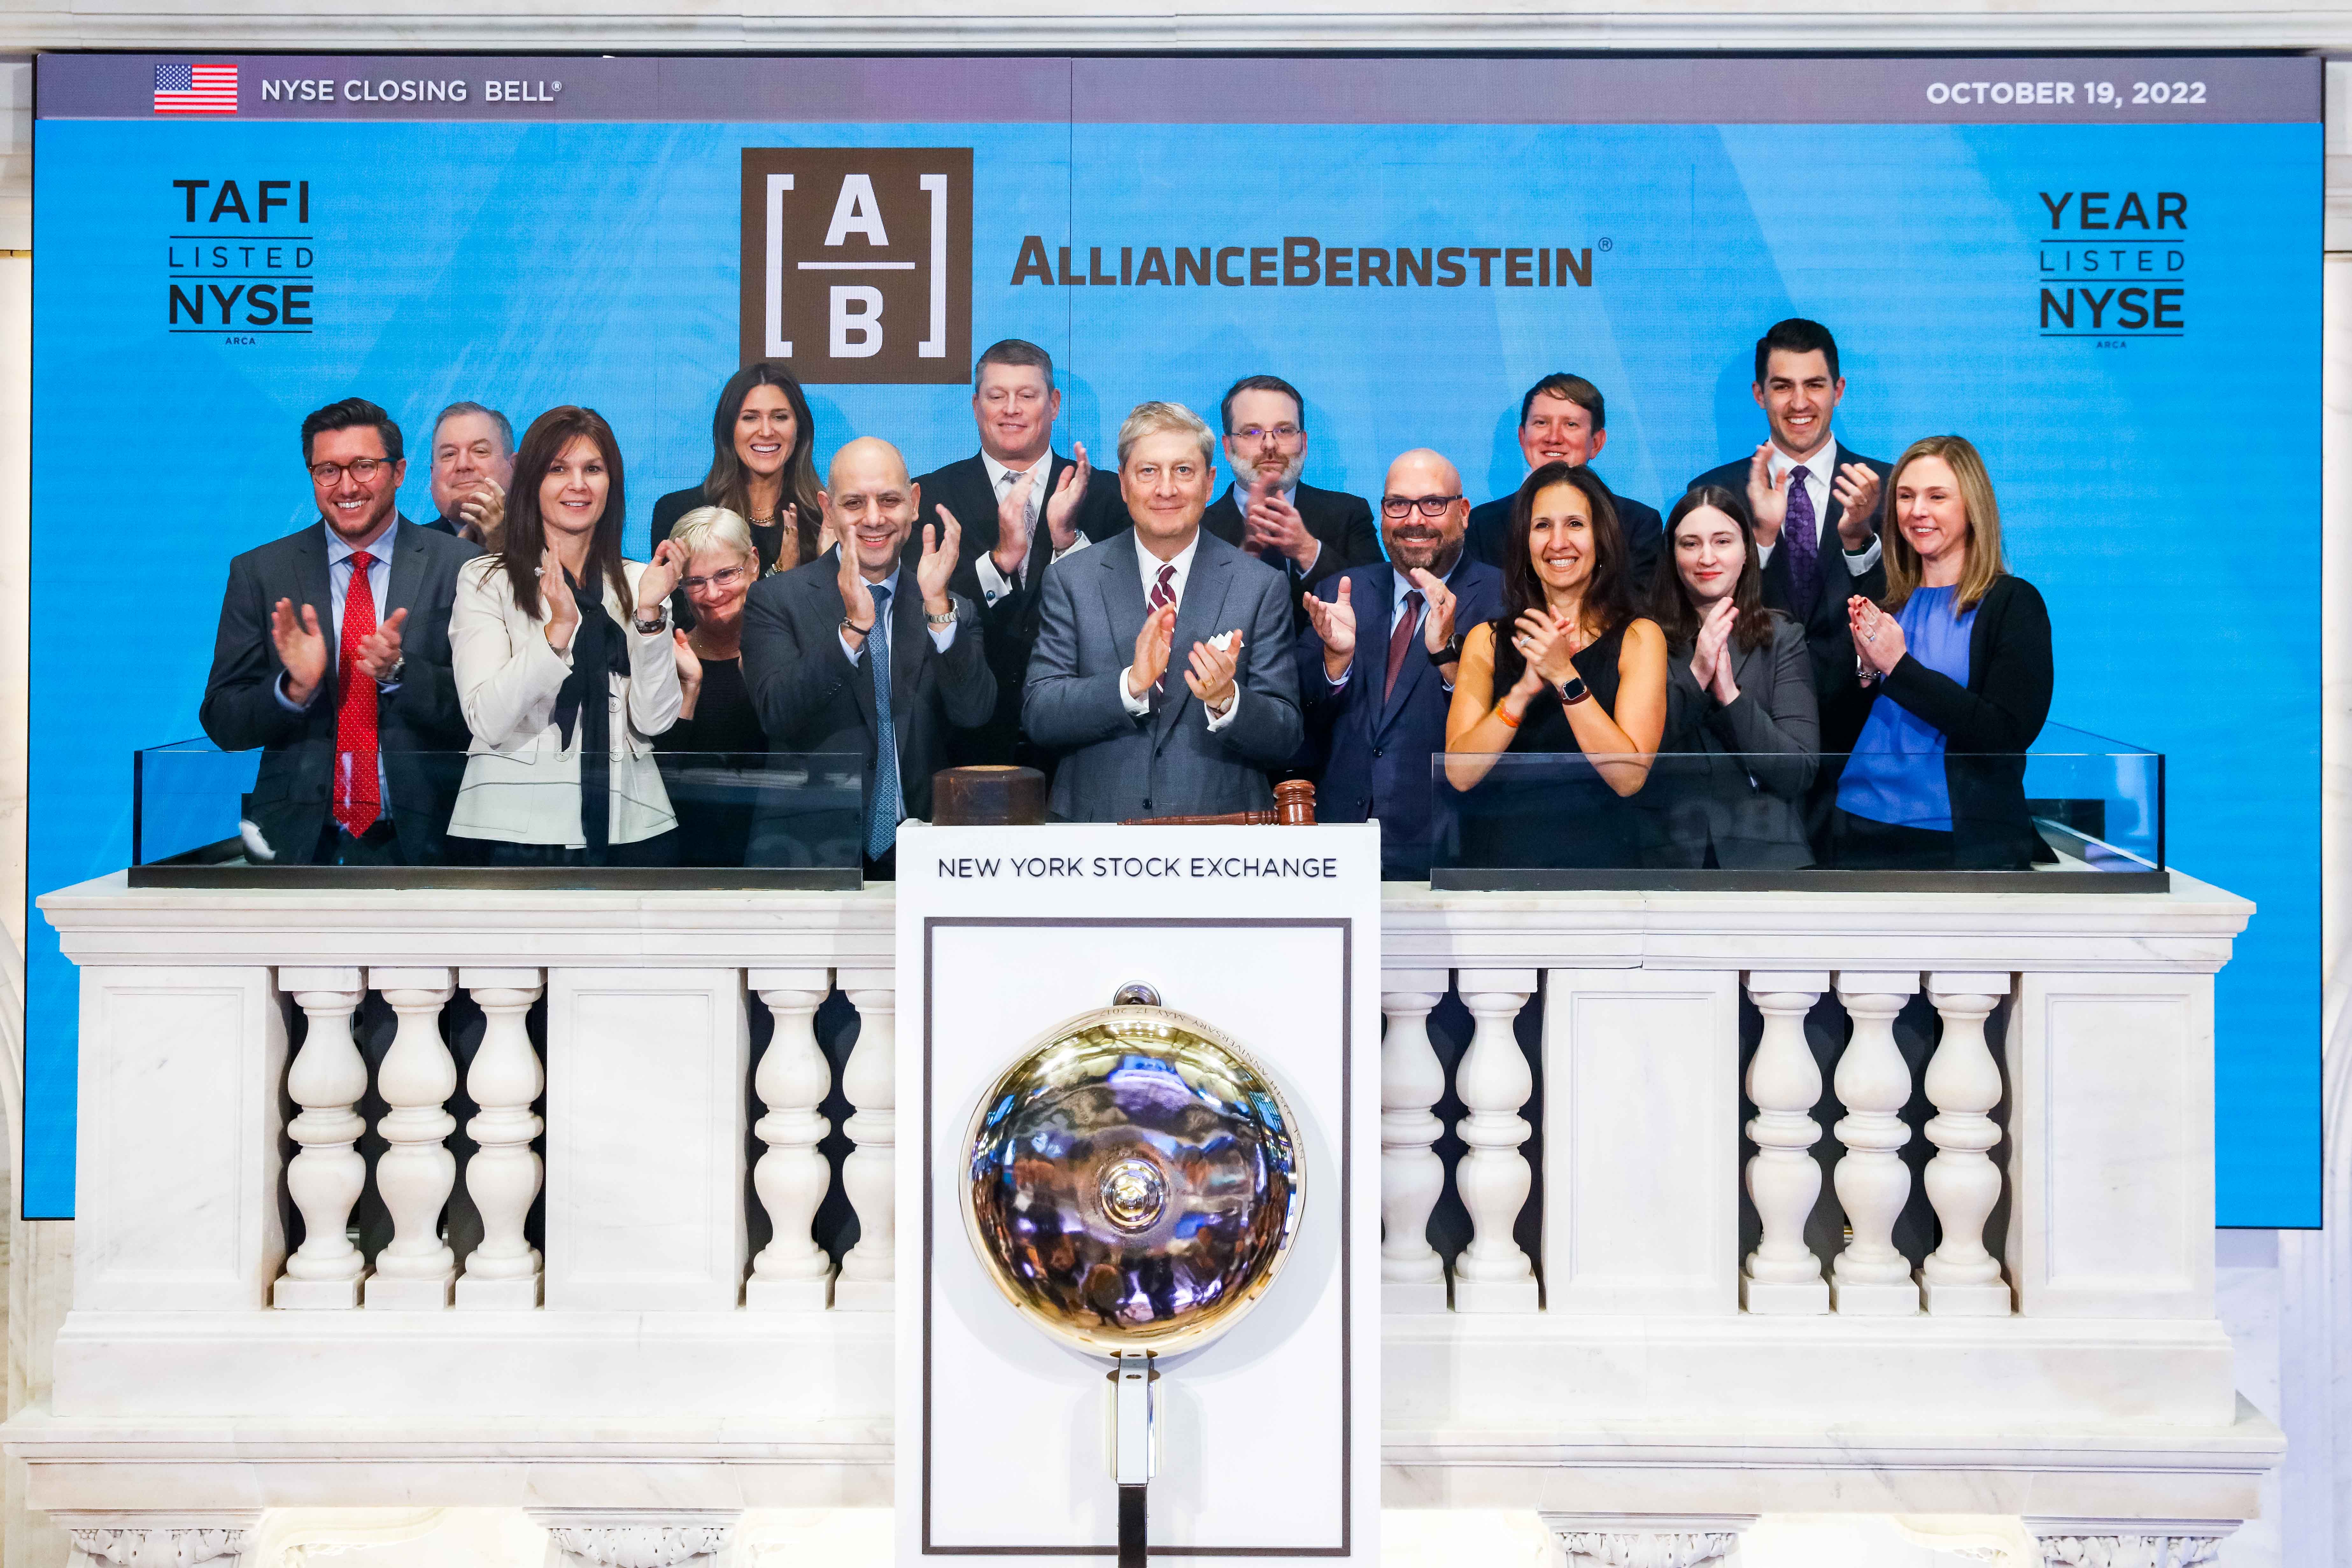 AllianceBerstein Rings The Closing Bell® 

The New York Stock Exchange welcomes executives and guests of AllianceBernstein, today, Wednesday, October 19, 2022, in celebration of the recent listing of AB Tax-Aware Short Duration Municipal ETF (NYSE Arca: TAFI) and AB Ultra Short Income ETF (NYSE Arca: YEAR). To honor the occasion, Seth Bernstein, CEO, and Onur Erzan, Head of Global Client Group & Head of Private Wealth, joined by Lynn Martin, NYSE President, rings The Closing Bell®. 
 
Photo Credit: NYSE